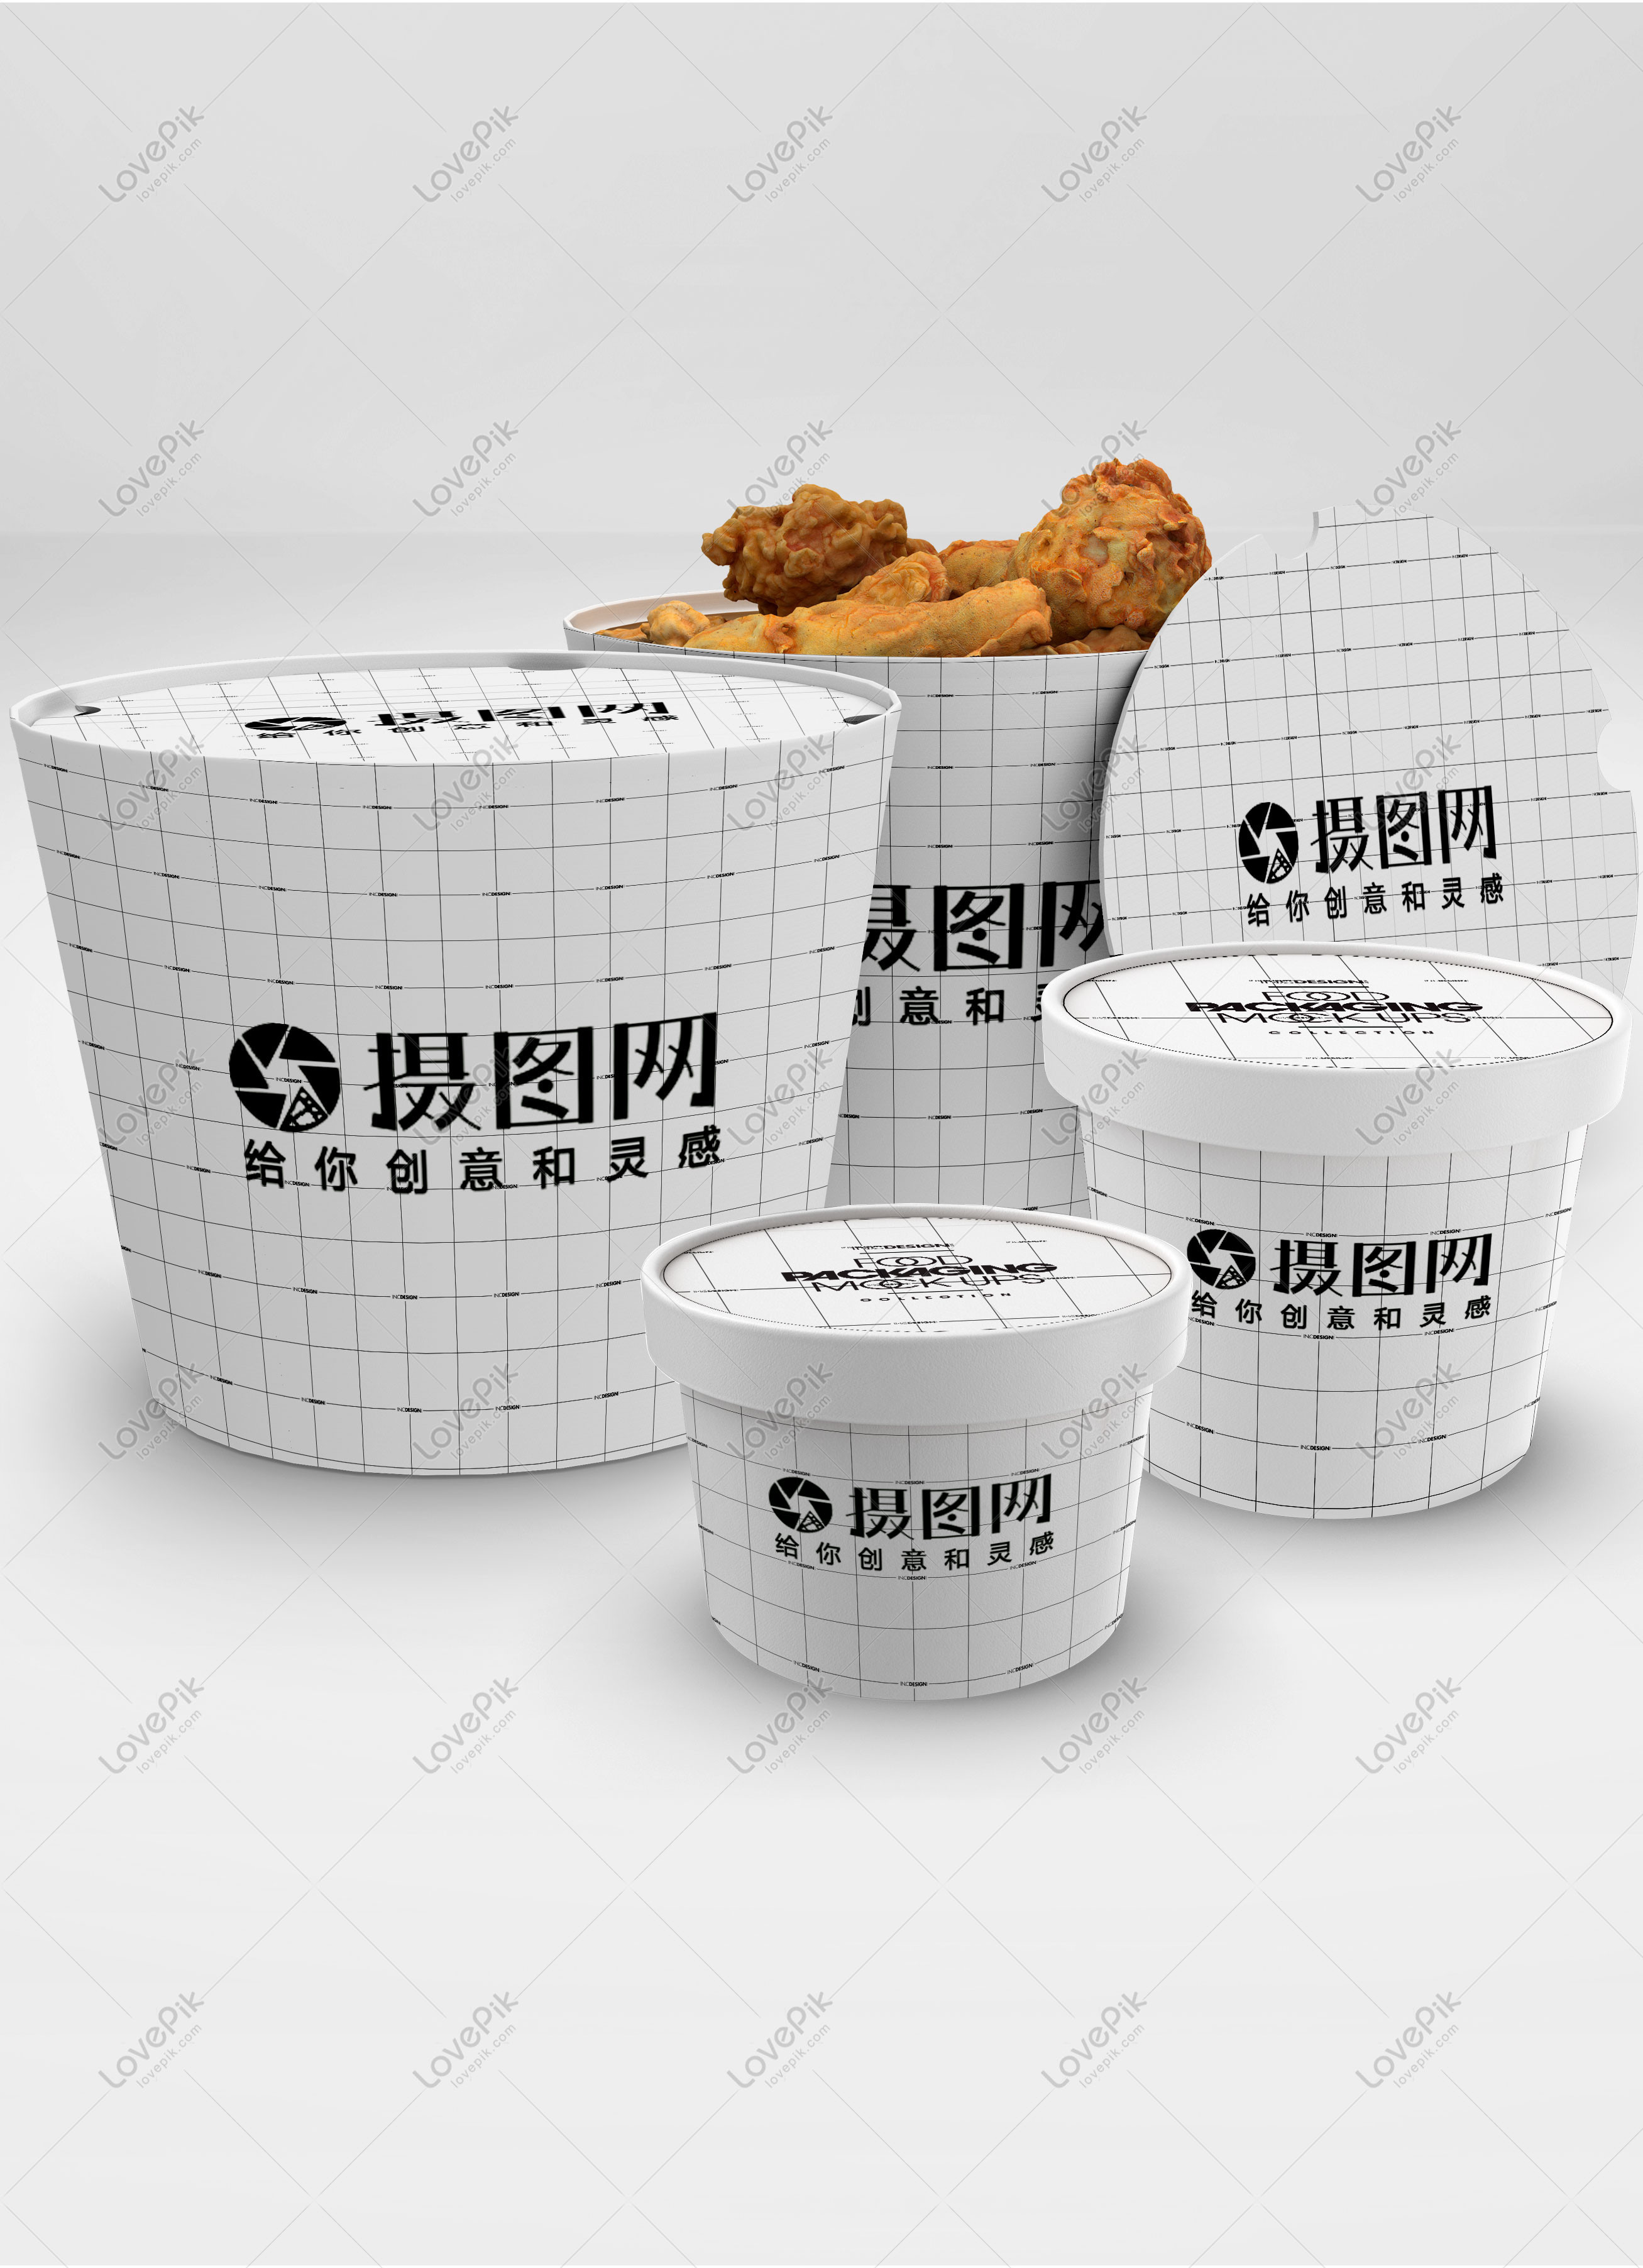 Download Fast Food Box Packaging Mockup Template Image Picture Free Download 400724843 Lovepik Com PSD Mockup Templates